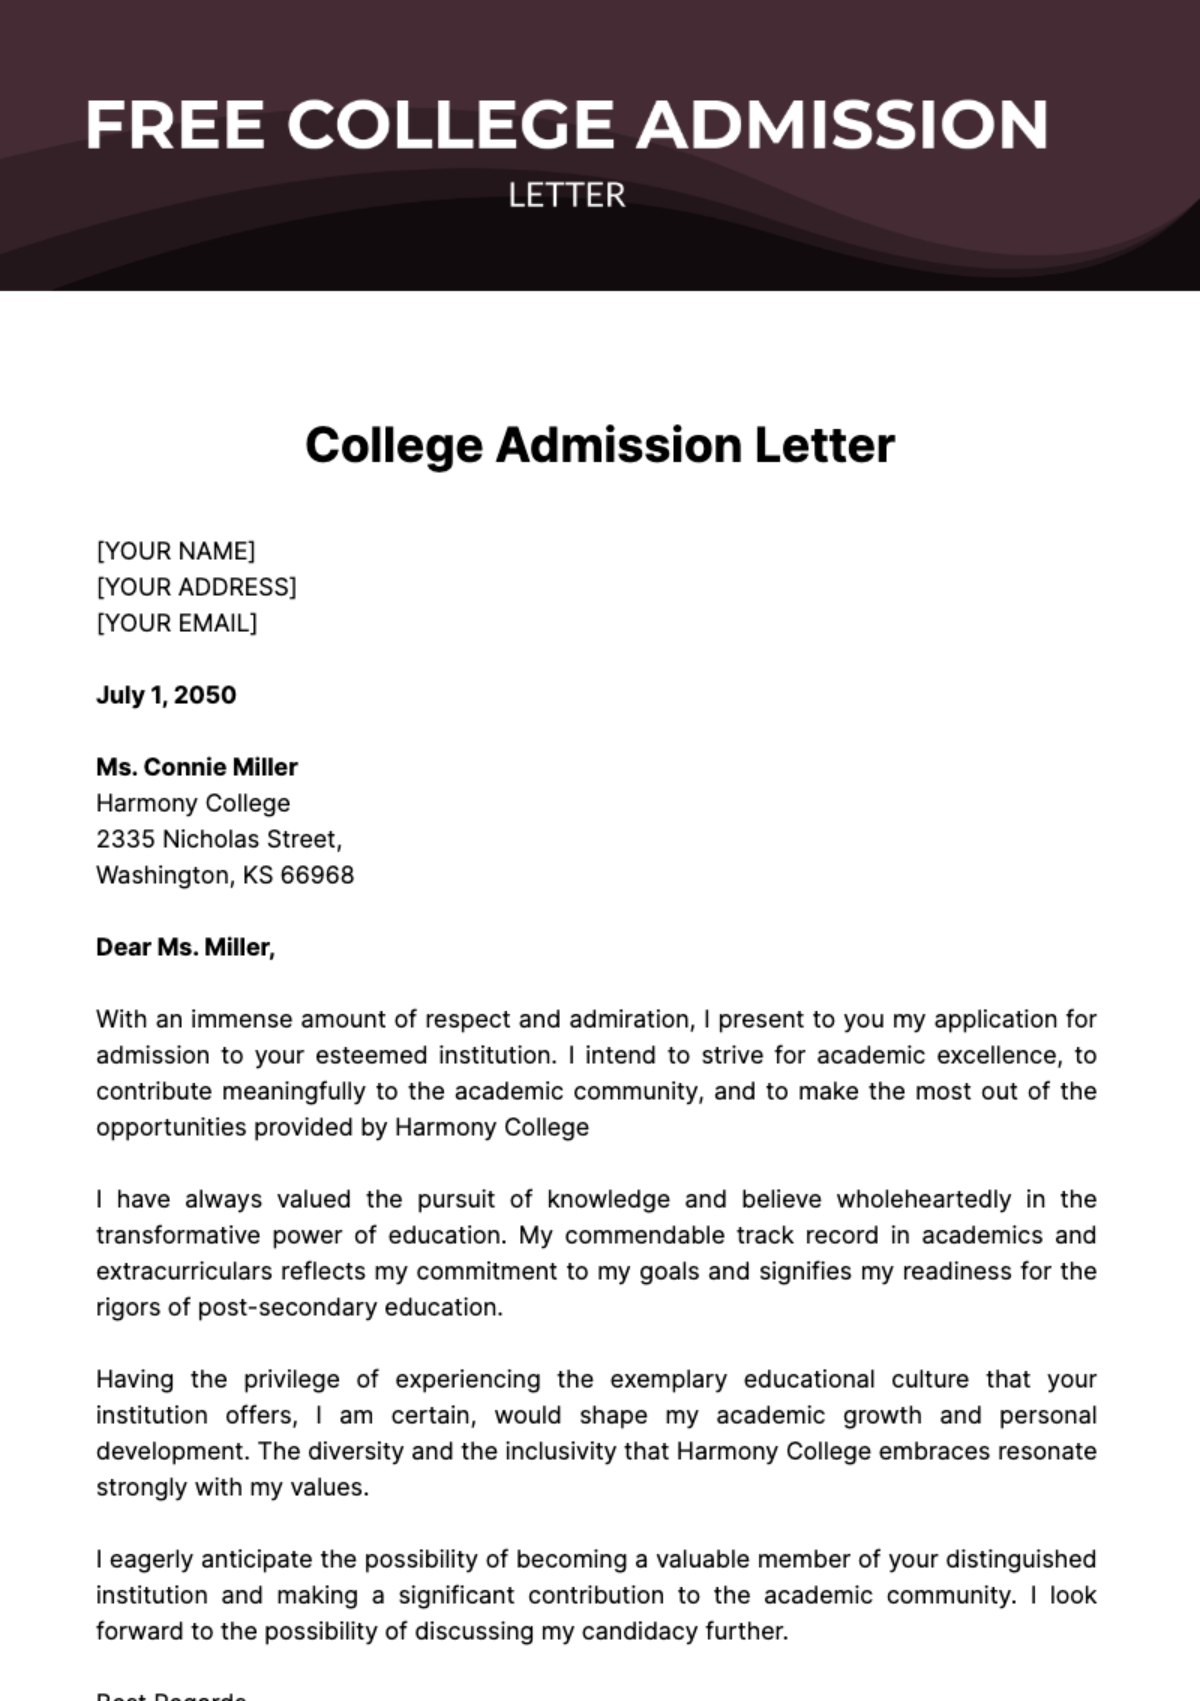 Free College Admission Letter Template